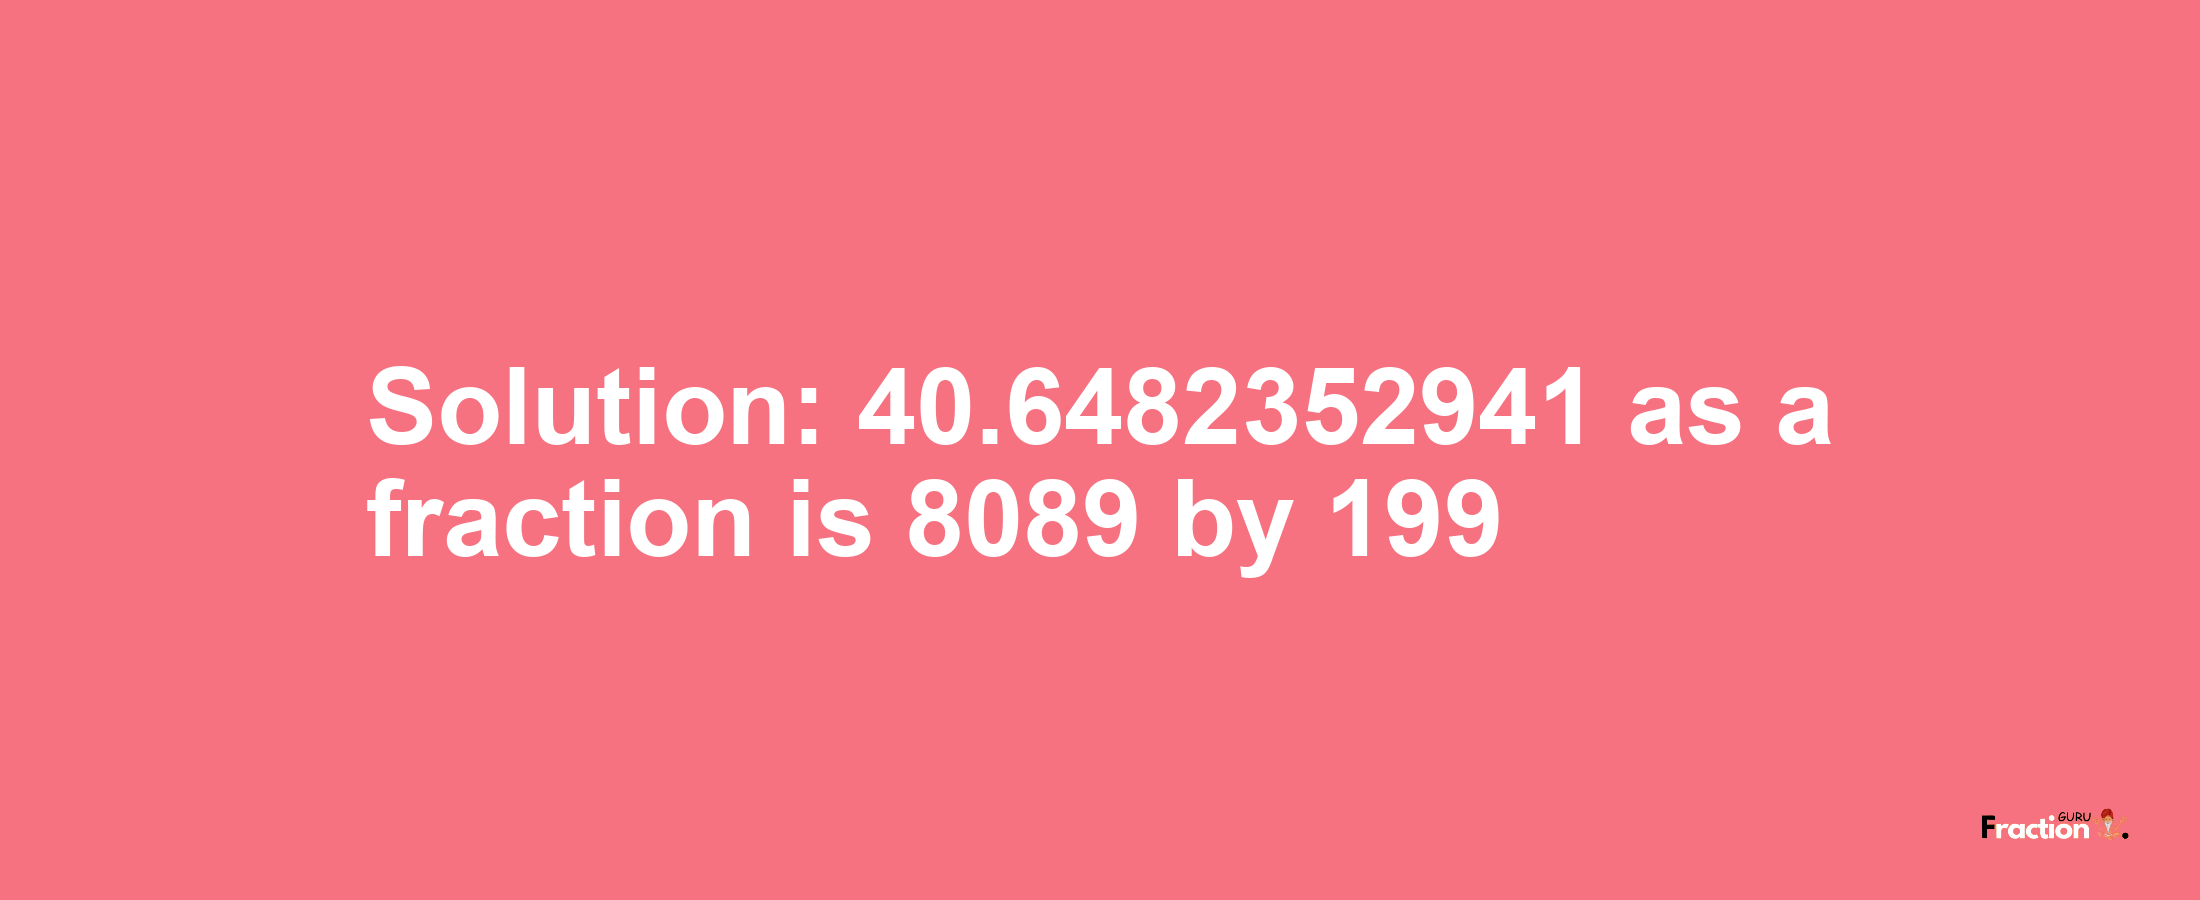 Solution:40.6482352941 as a fraction is 8089/199